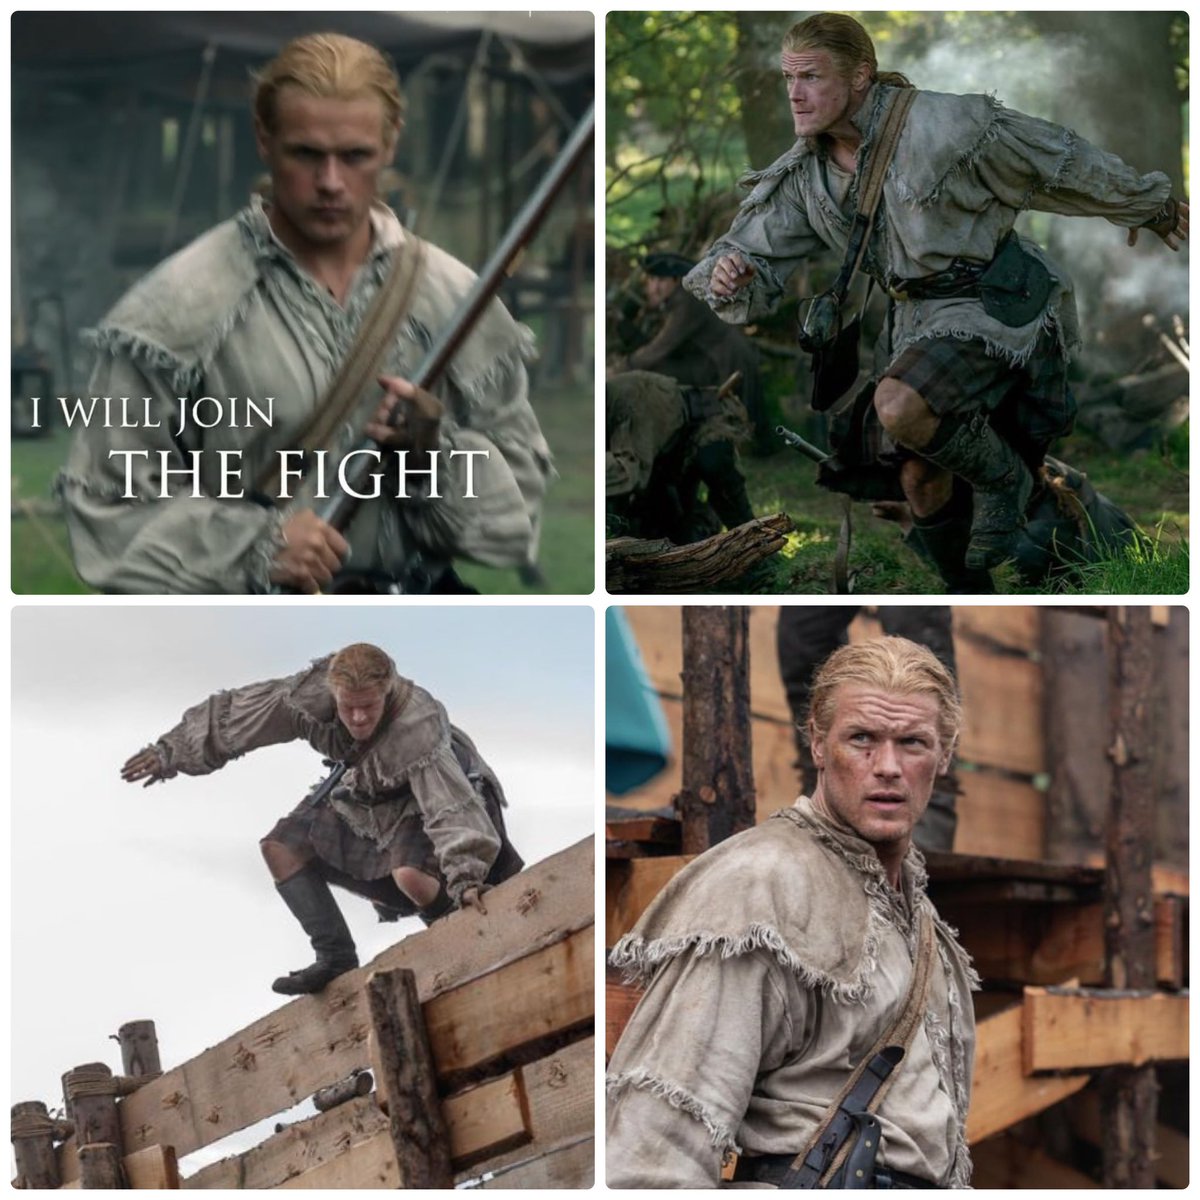 🌟Wishing you a goodnight and a Happy Fraser Friday with Warrior Jamie in S7! #JamieFraser #SamHeughan #Outlander